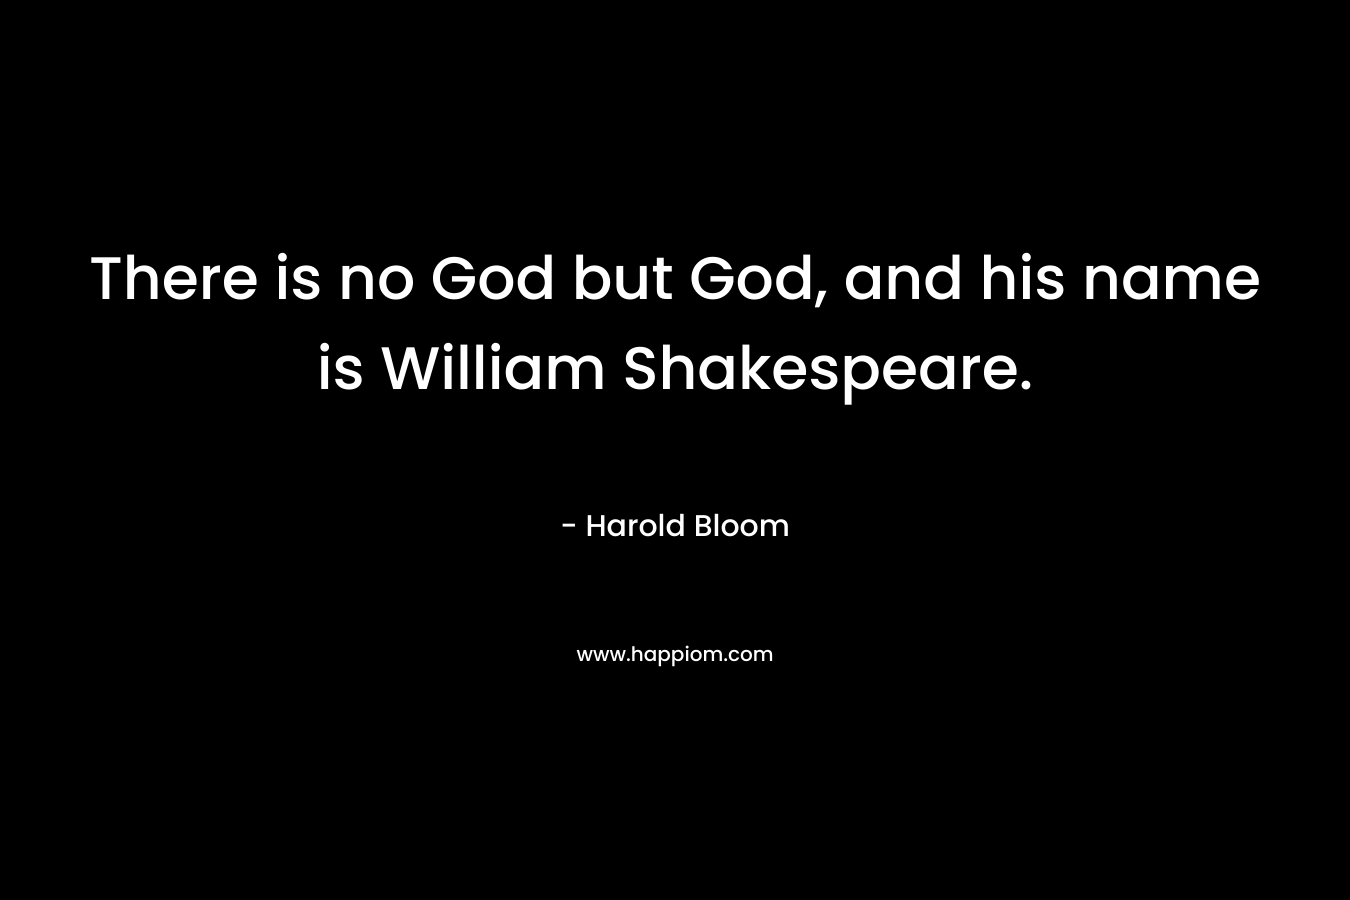 There is no God but God, and his name is William Shakespeare.